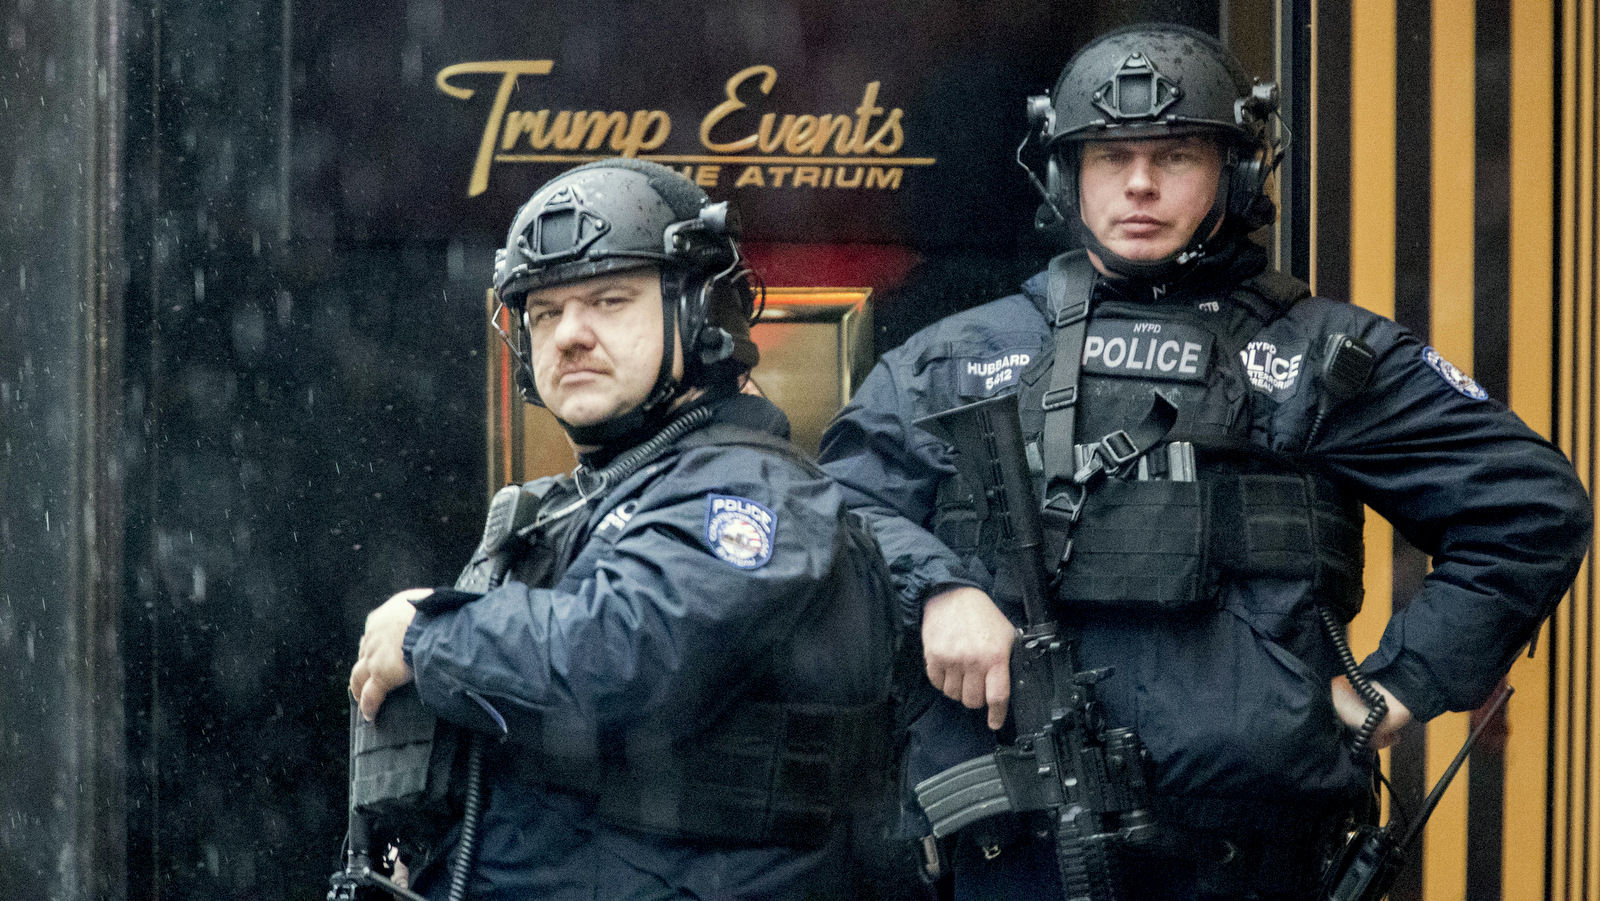 Heavily armed police officers stand guard in the rain outside Trump Tower, Tuesday, Nov. 29, 2016, in New York. (AP Photo/Mary Altaffer)